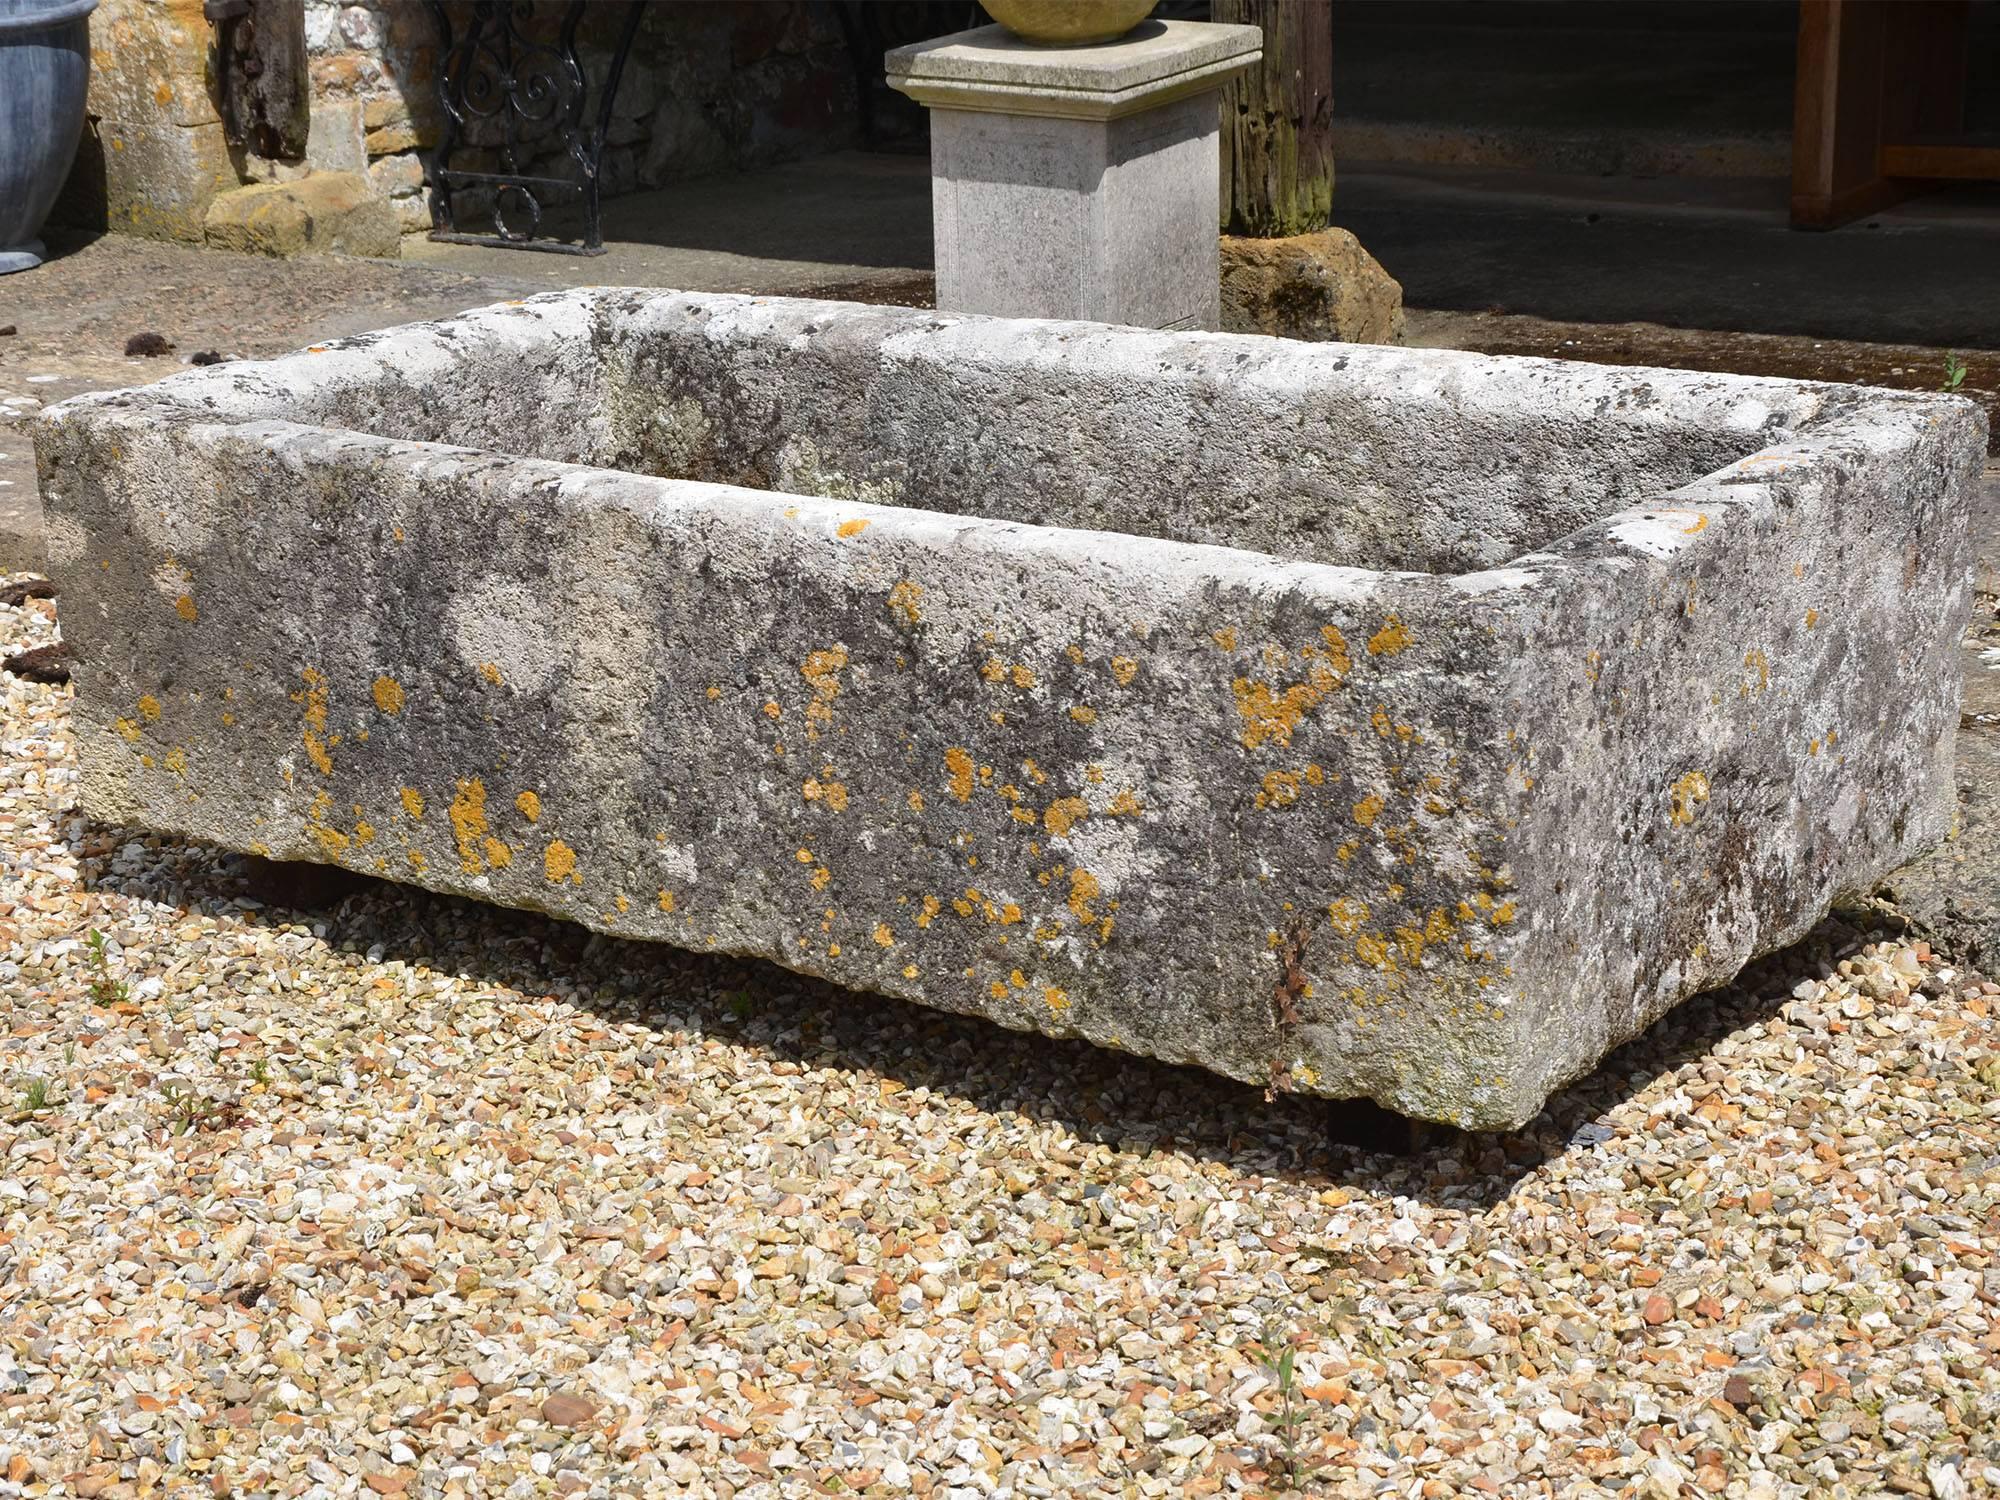 A large 18th century rectangular stone trough

With good weathering and patination.